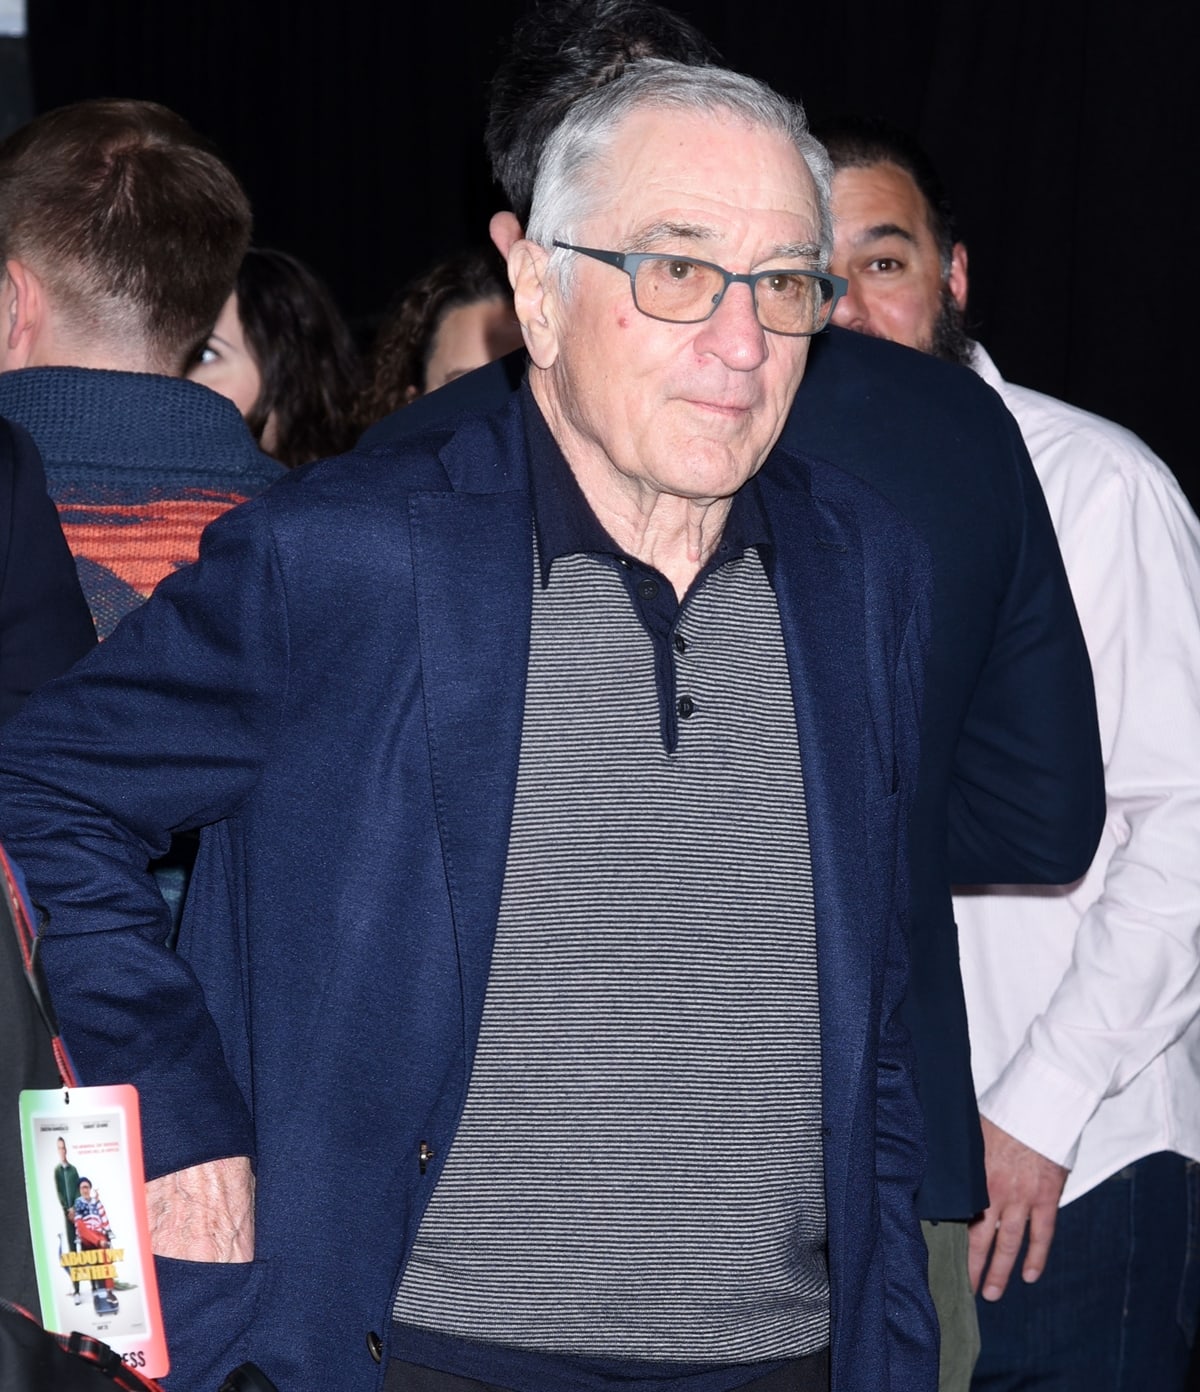 Actor Robert De Niro has become a father for the seventh time, according to a representative for the actor who confirmed the news